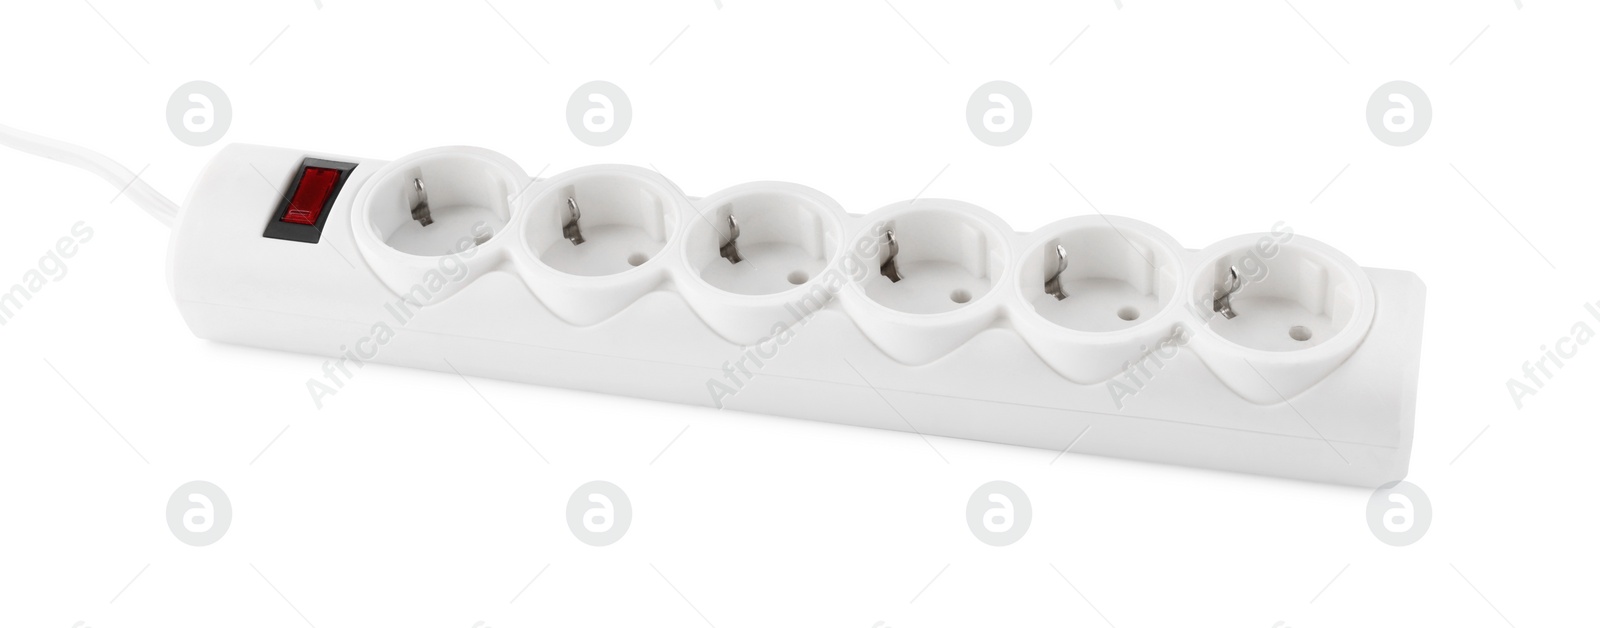 Photo of Power strip on white background. Electrician's equipment